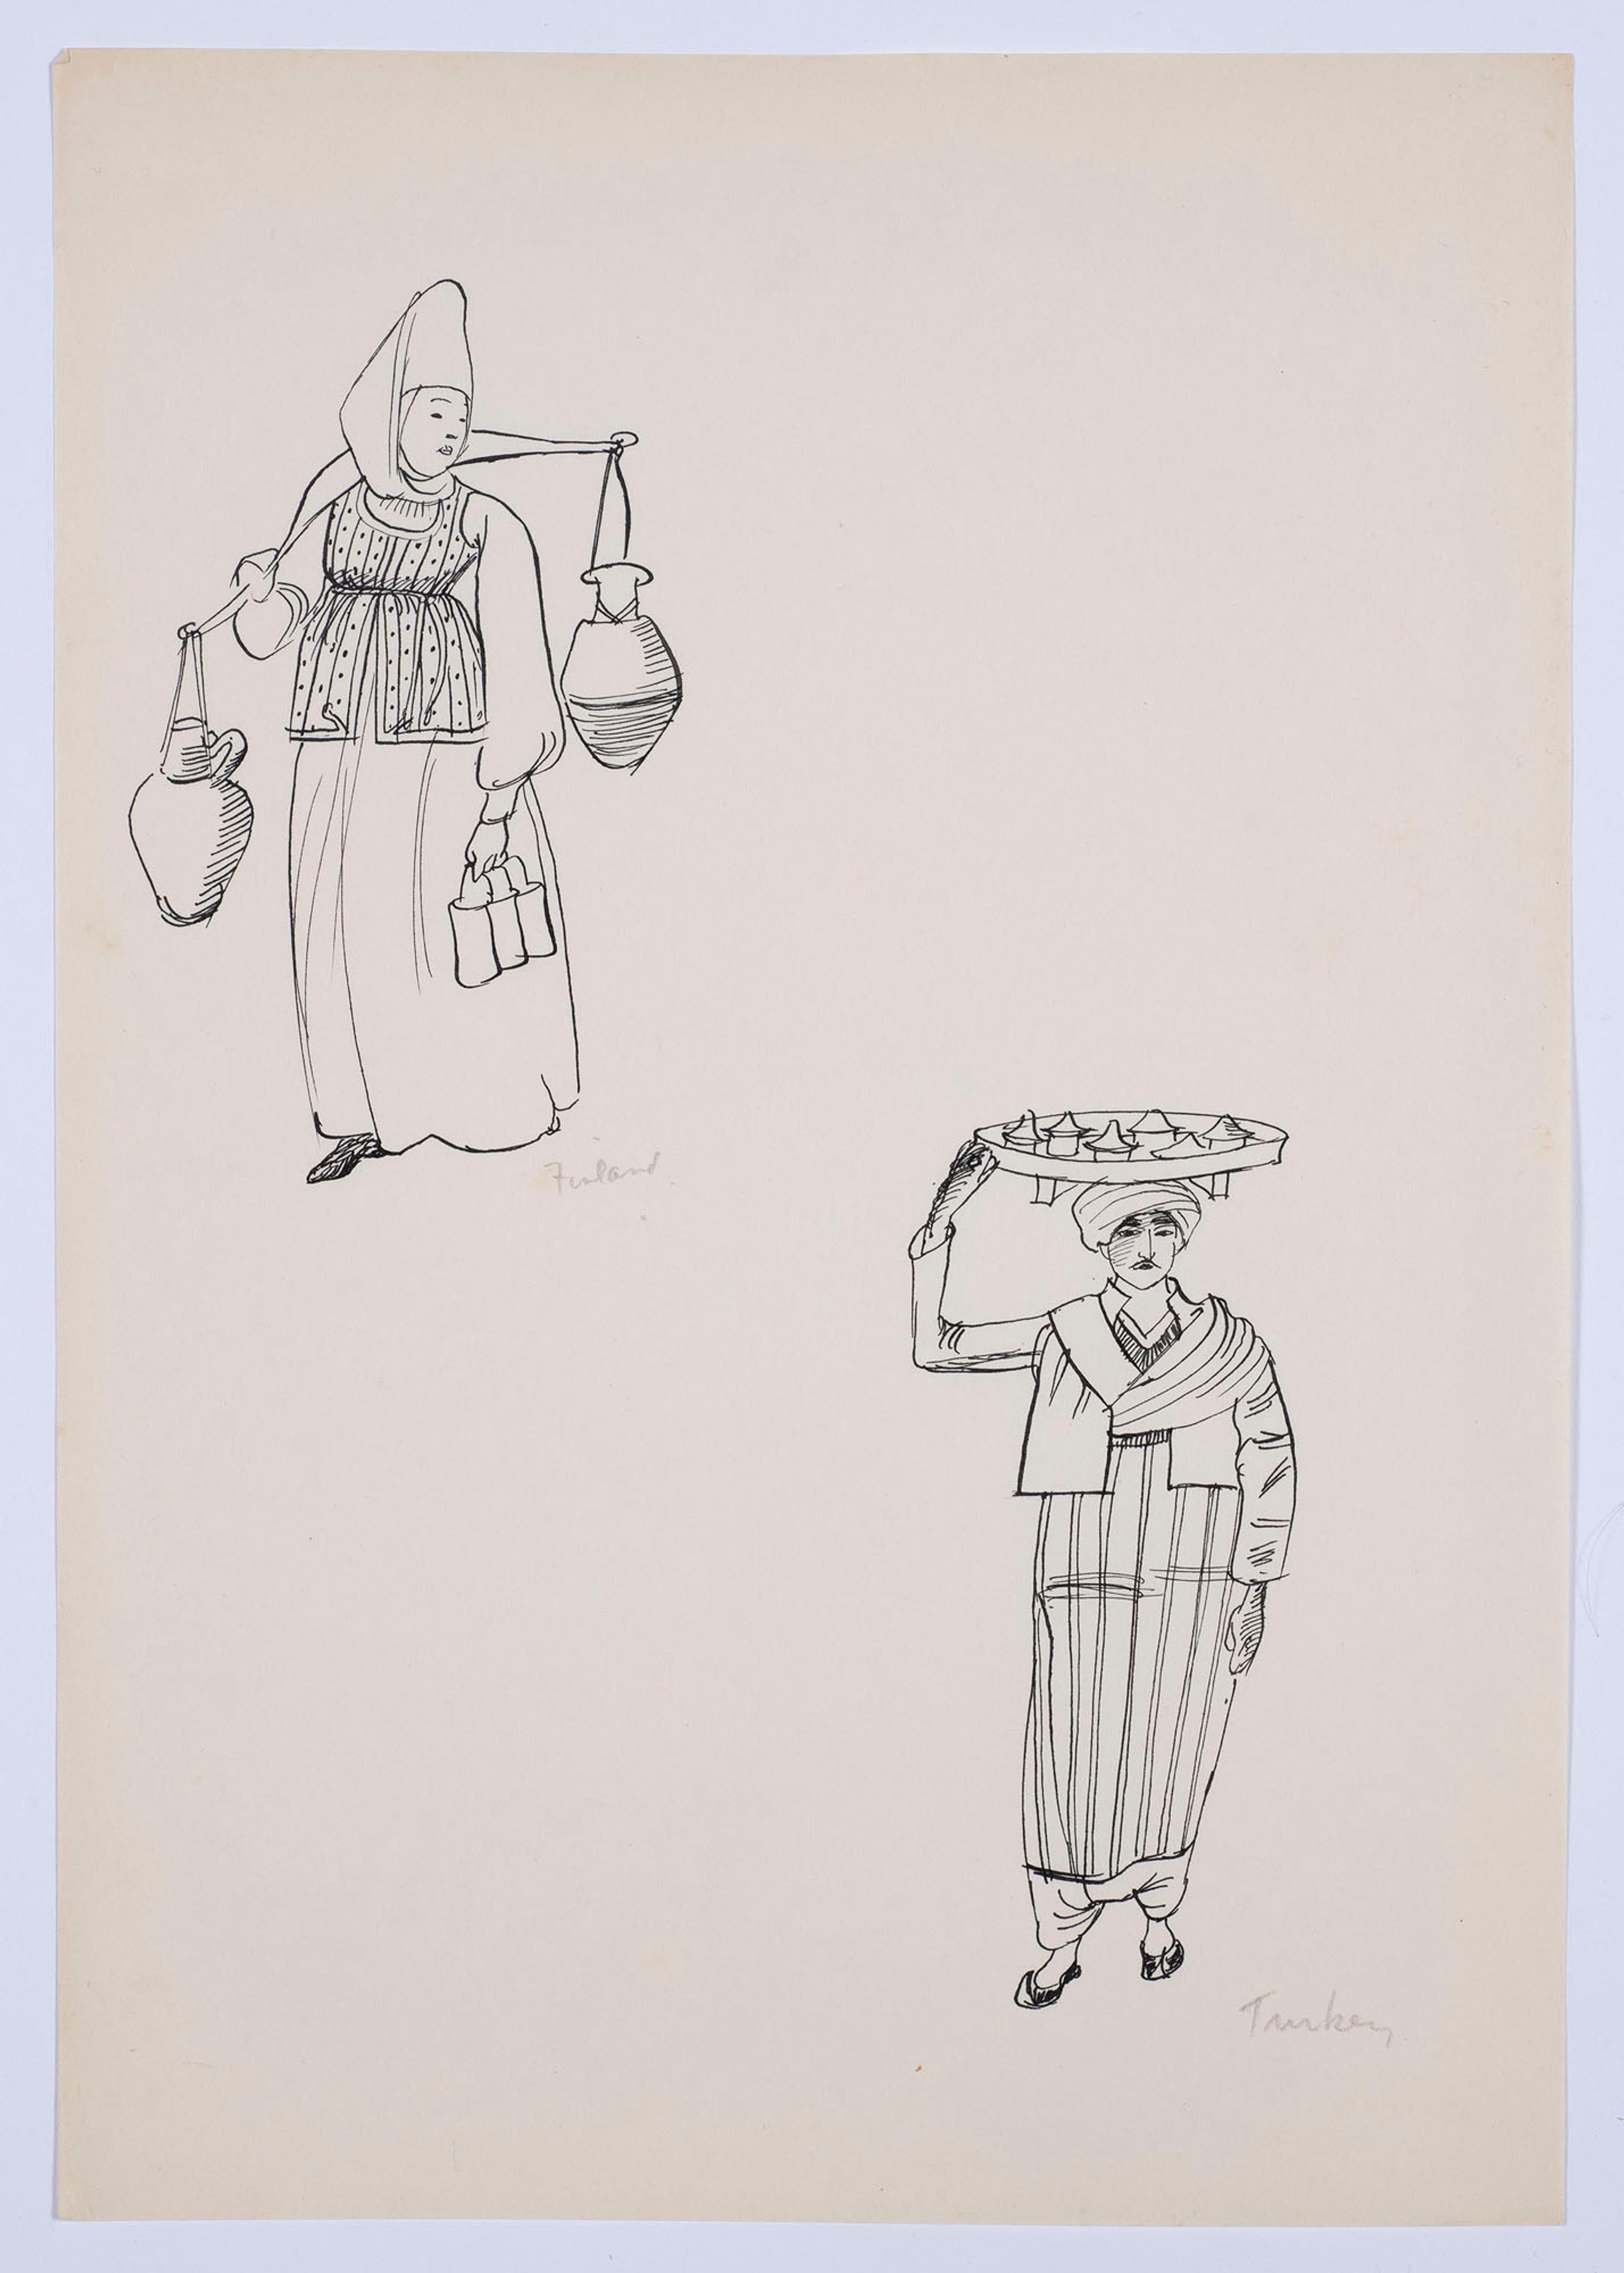 Black and white drawings of figures in Finnish and Turkish national dress